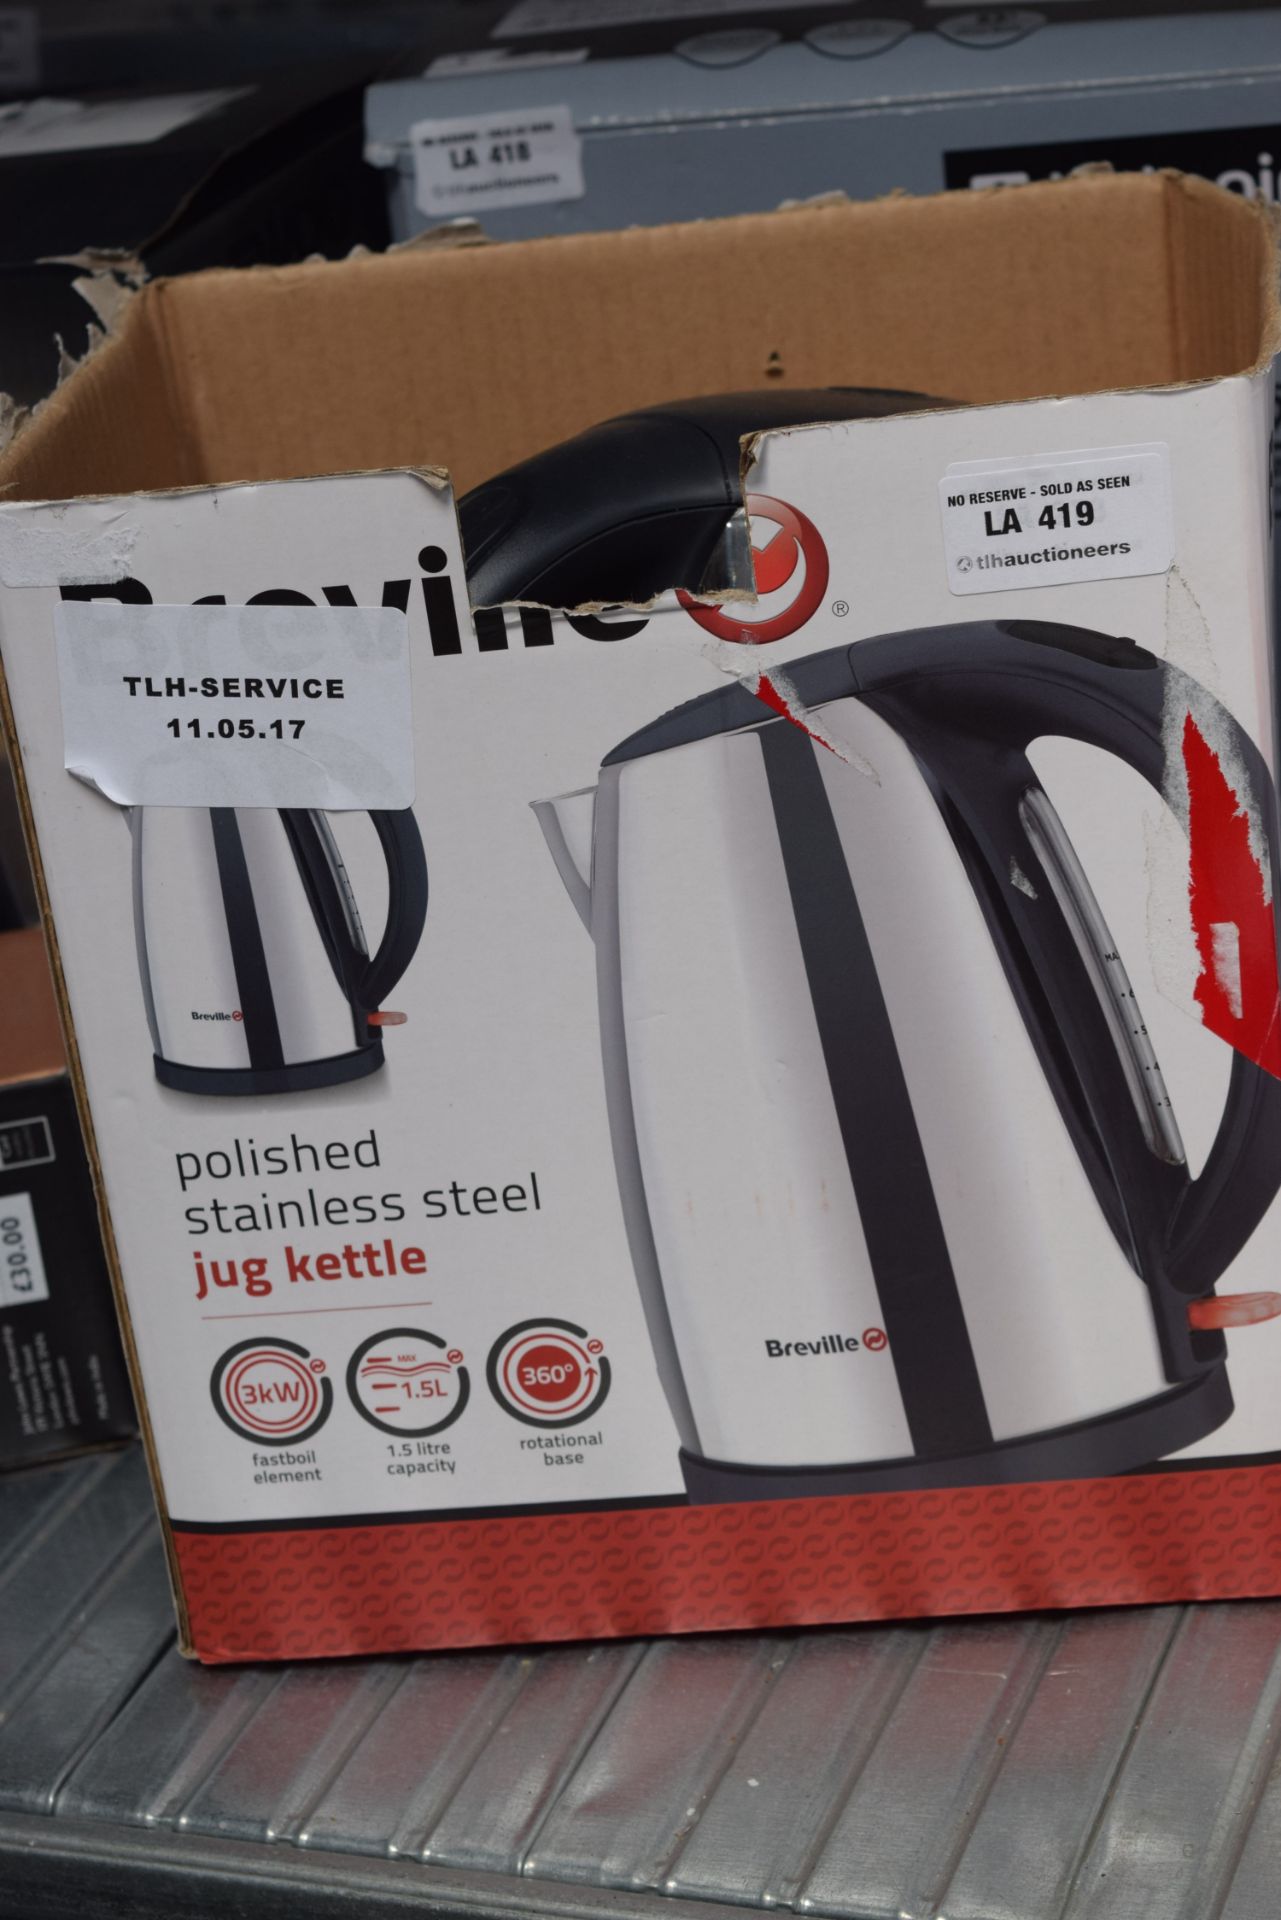 1 X BREVILLE POLISHED STAINLESS STEEL JUG KETTLE RRP £30 11.05.2017